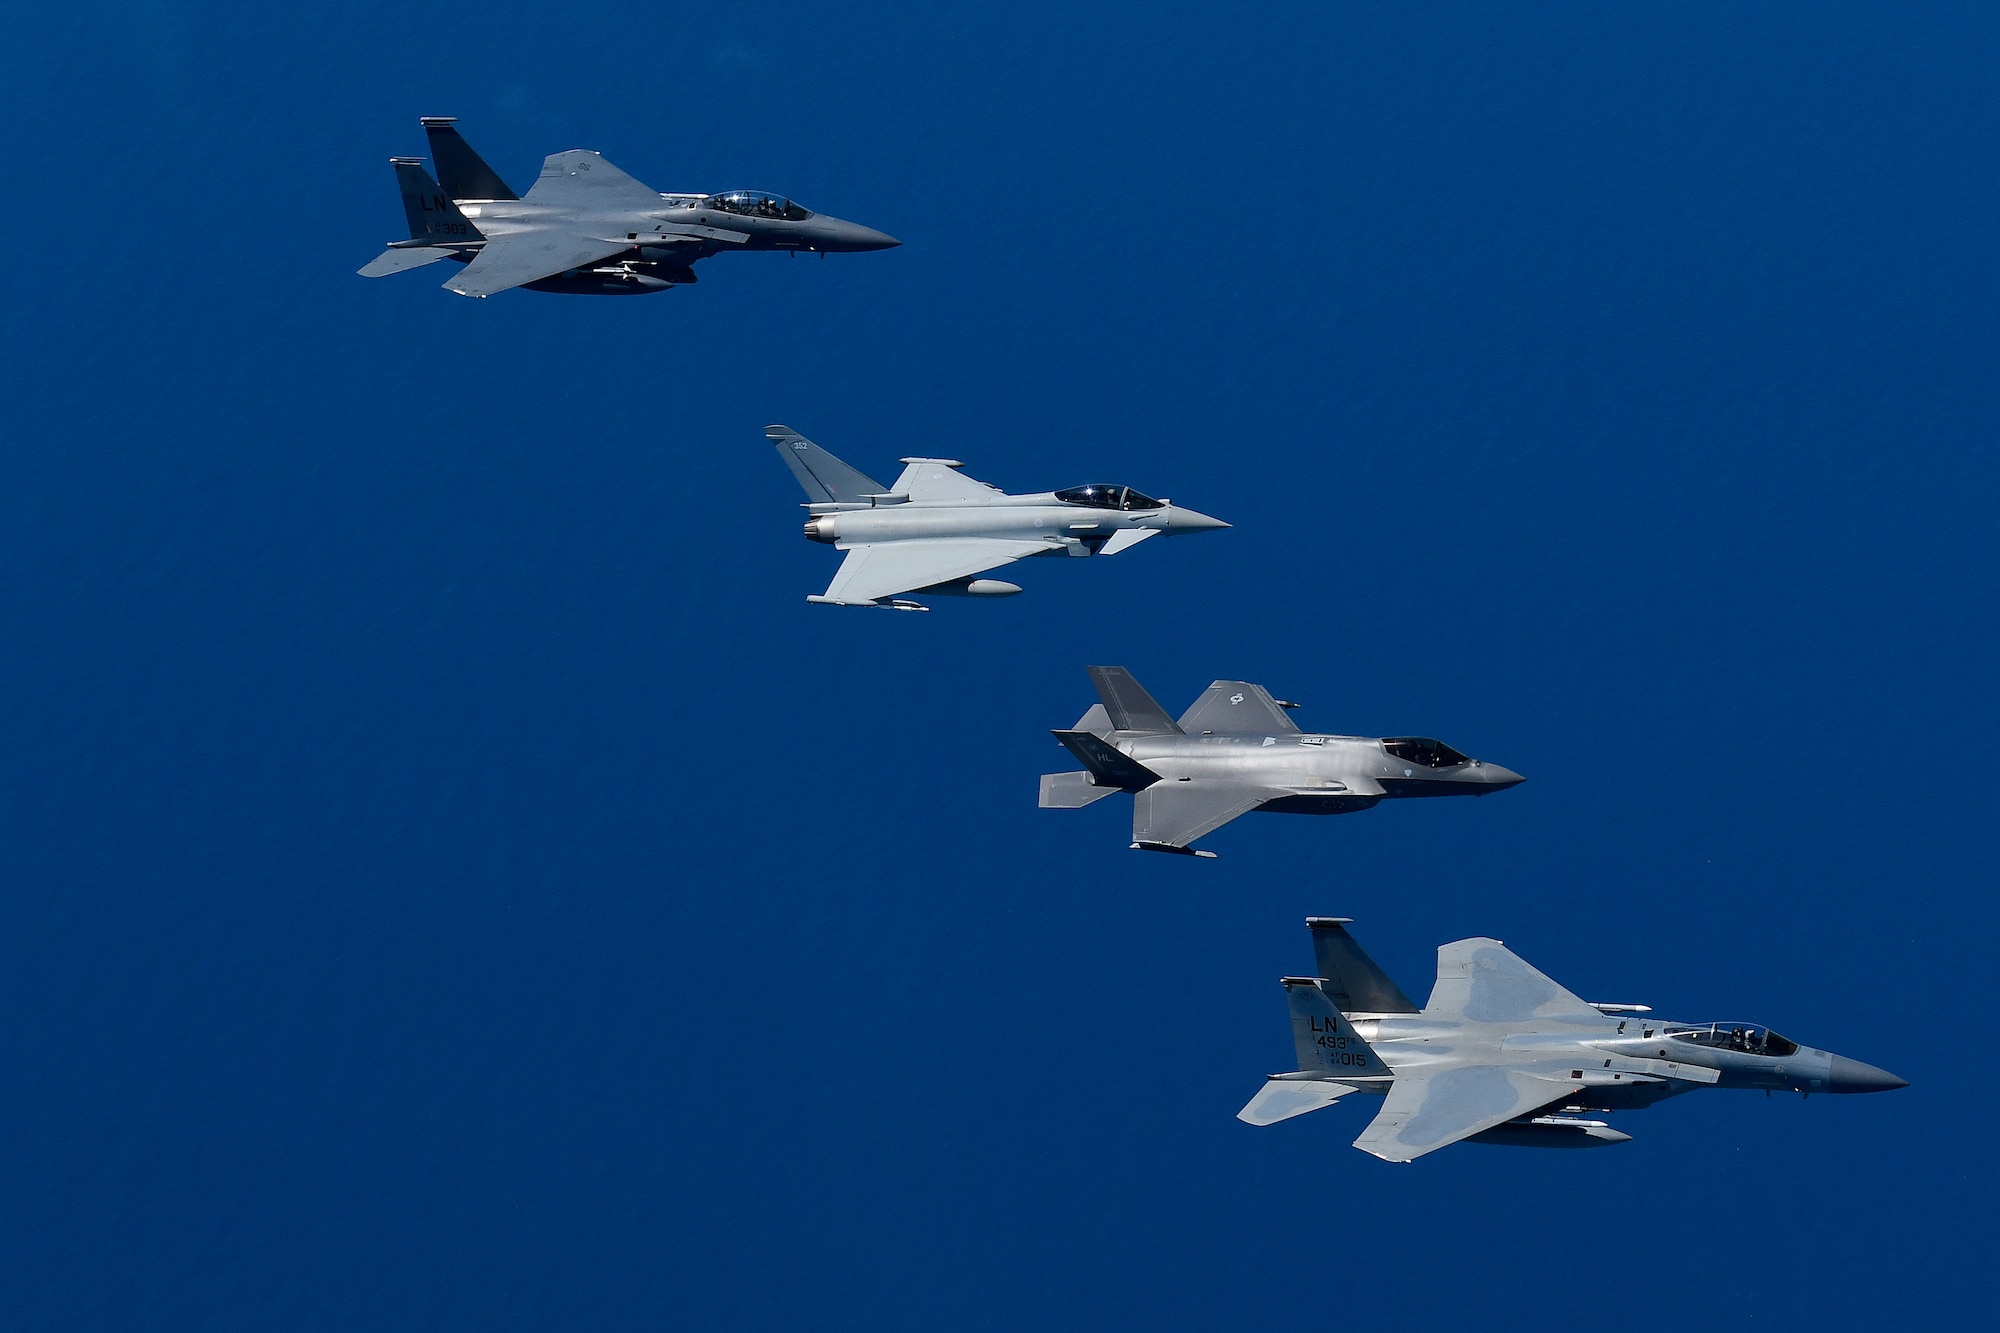 U.S. Air Force fourth and fifth-generation aircraft fly in an echelon formation with a Royal Air Force Typhoon in support of exercise Pointblank 19-2, over the North Sea, June 27, 2019. The objective of the exercise is to prepare coalition warfighters for a highly contested fight against near-peer adversaries by providing a multi-dimensional battle-space to conduct advanced training in support of US, UK and French national interests. (U.S. Air Force photo/ Tech. Sgt. Matthew Plew)